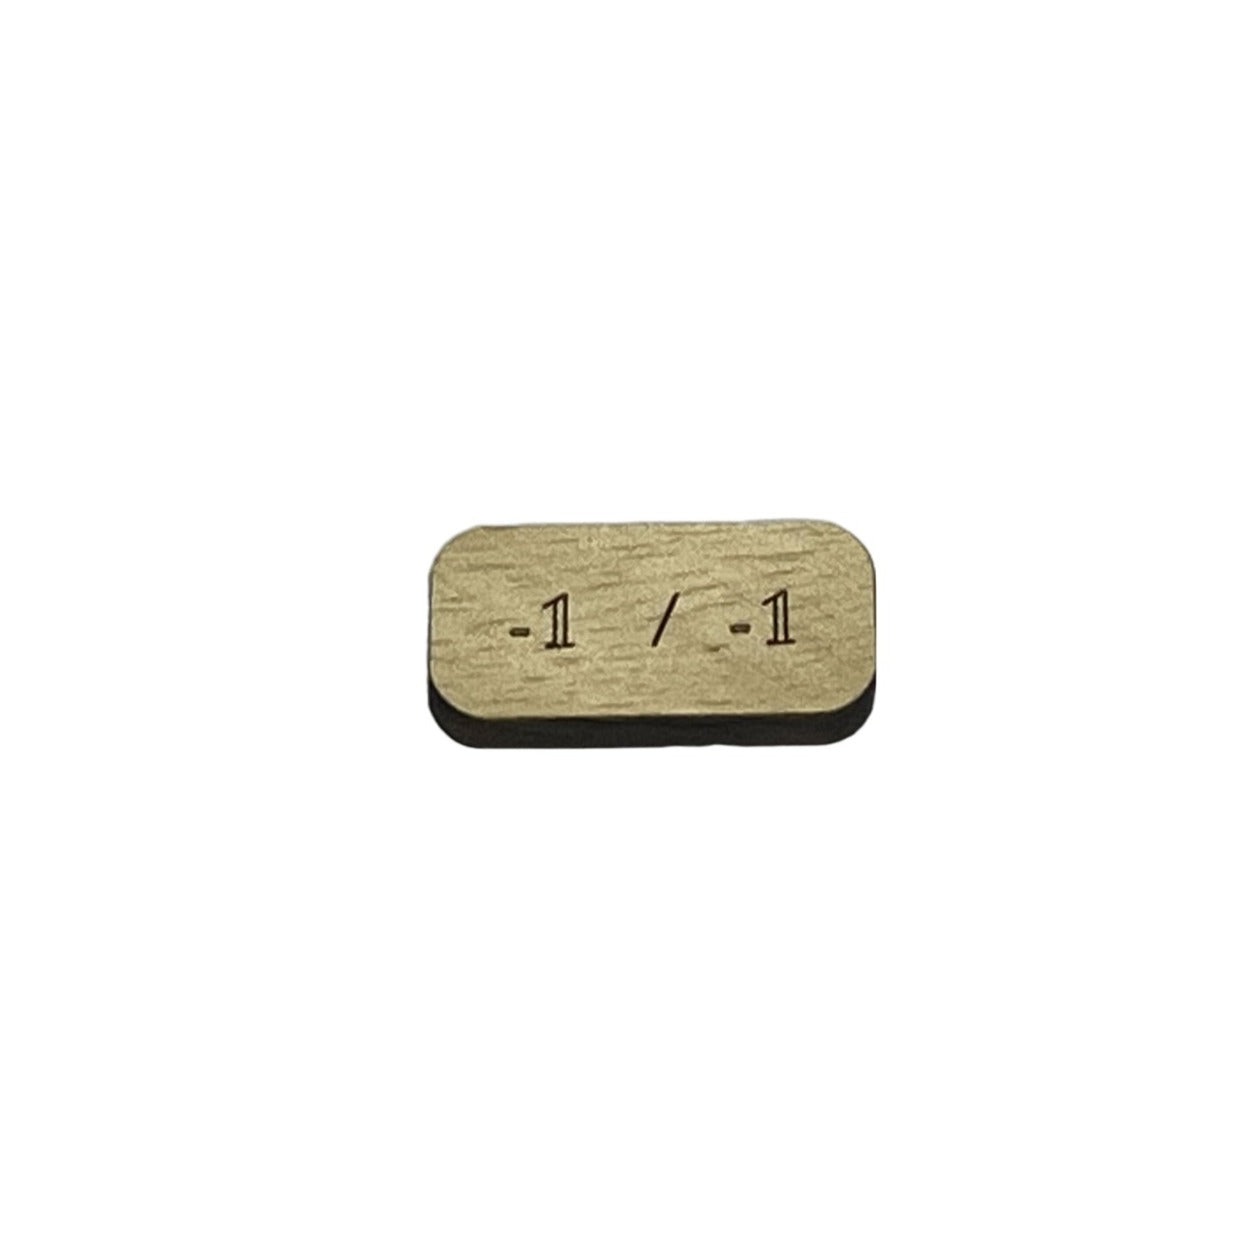 Wooden Magic the Gathering MTG -1/-1 counters